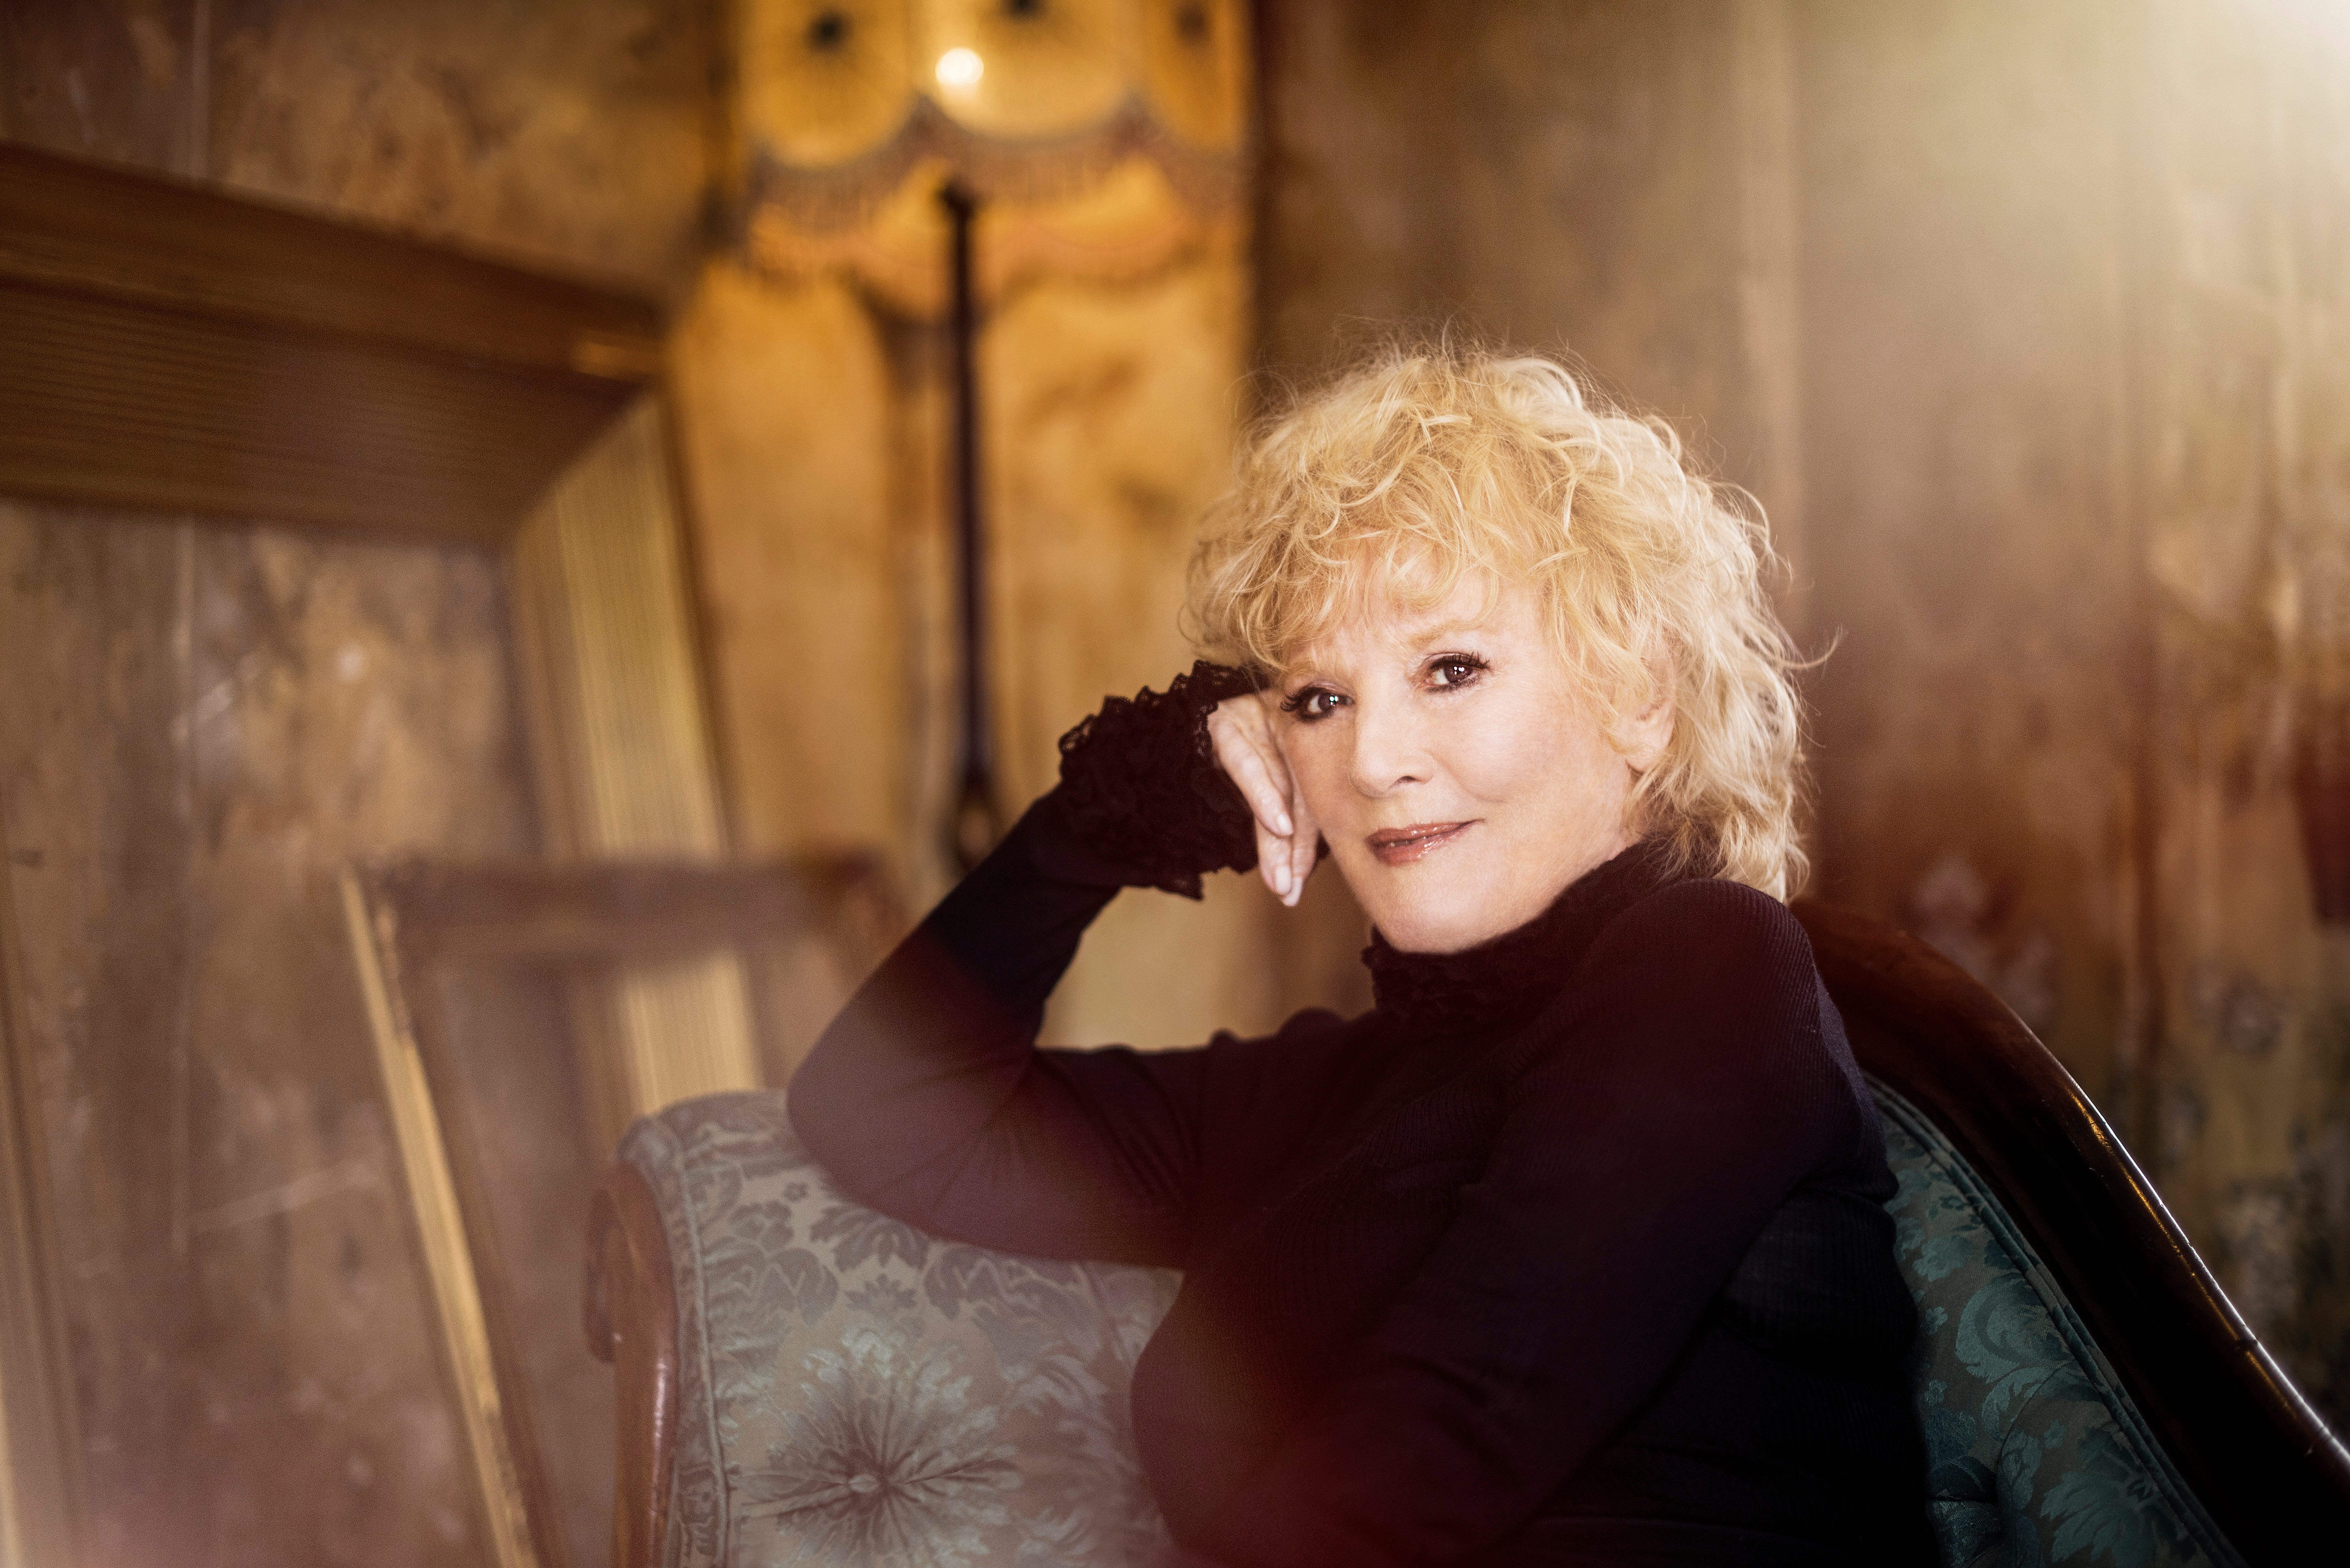 the song downtown by petula clark